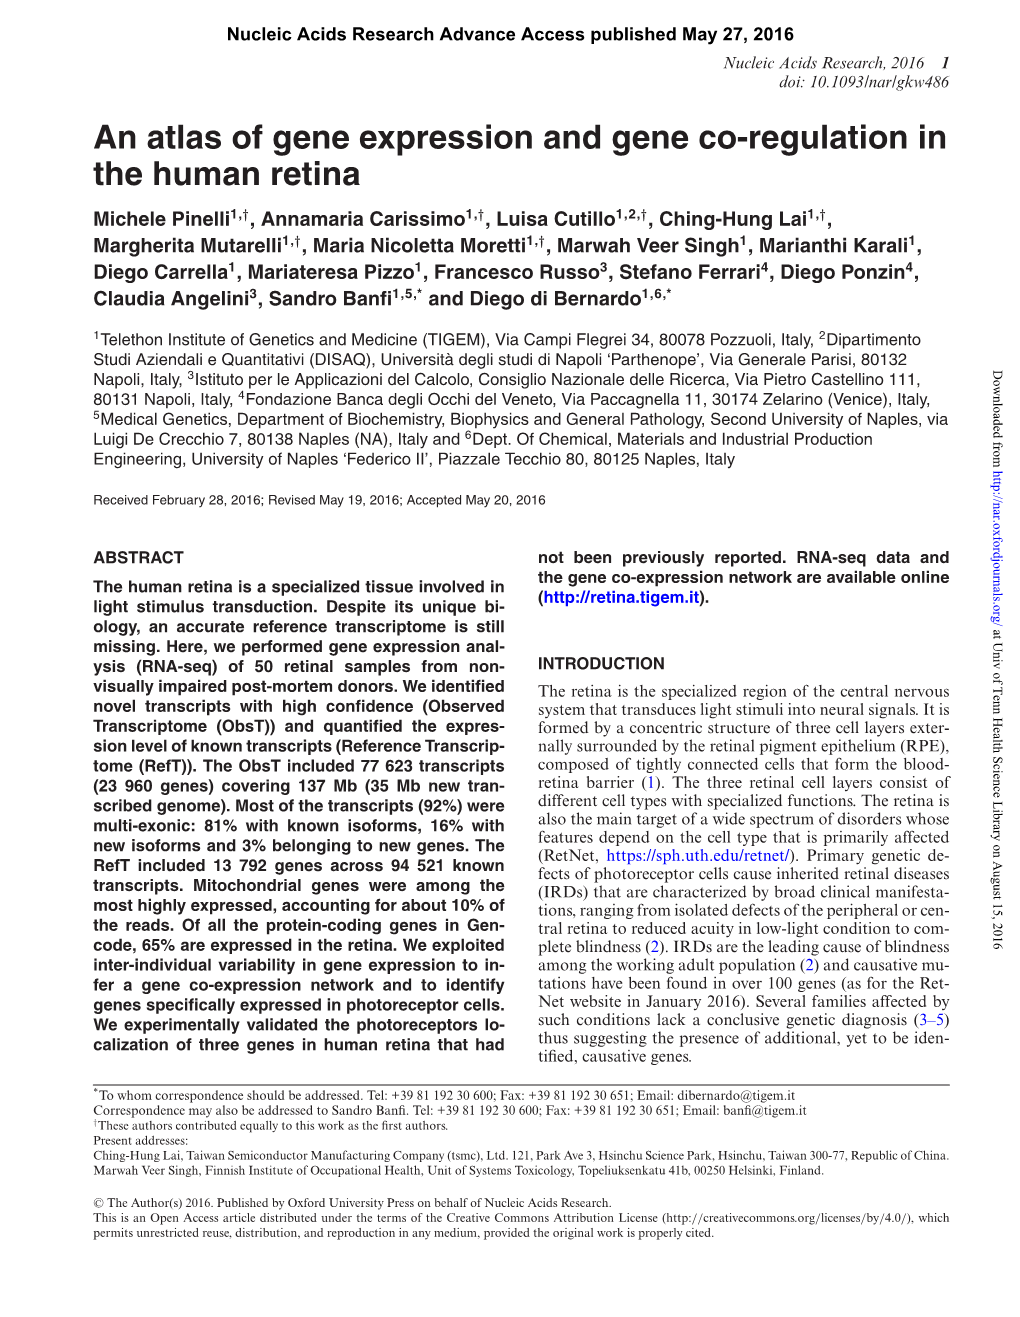 An Atlas of Gene Expression and Gene Co-Regulation in the Human Retina